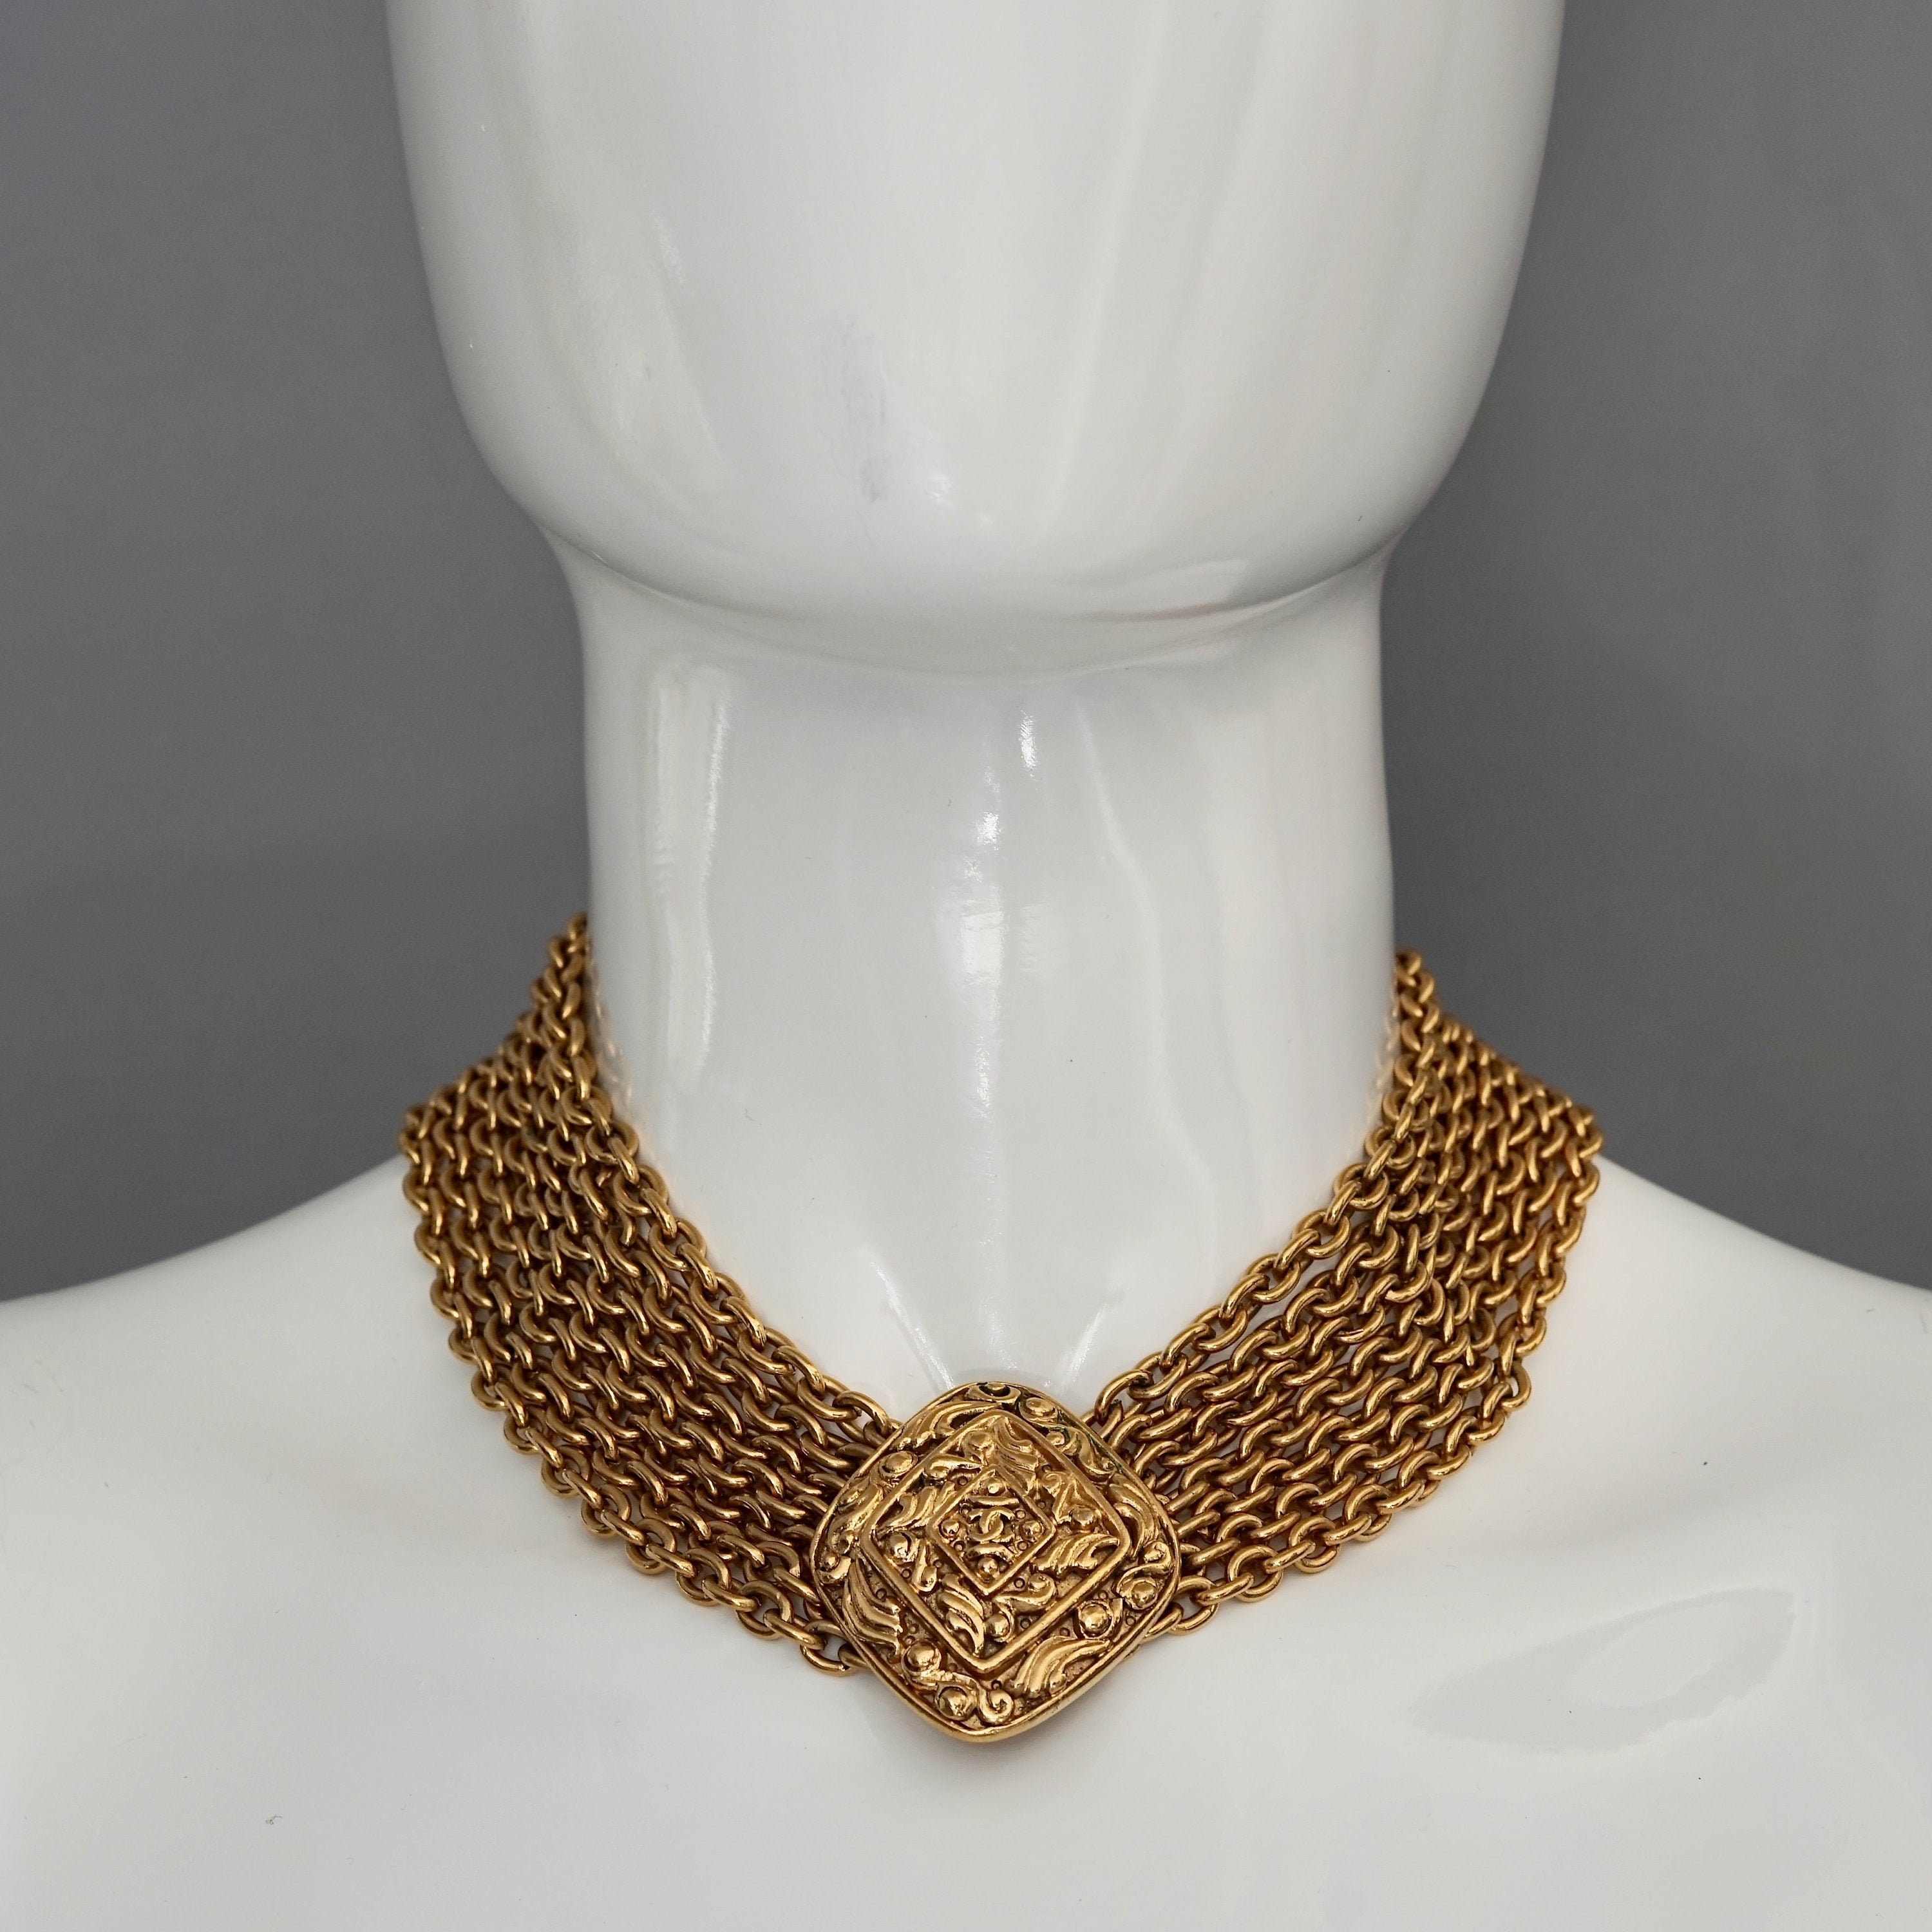 Vintage CHANEL Golden Triple Chain Long Necklace With Classic 